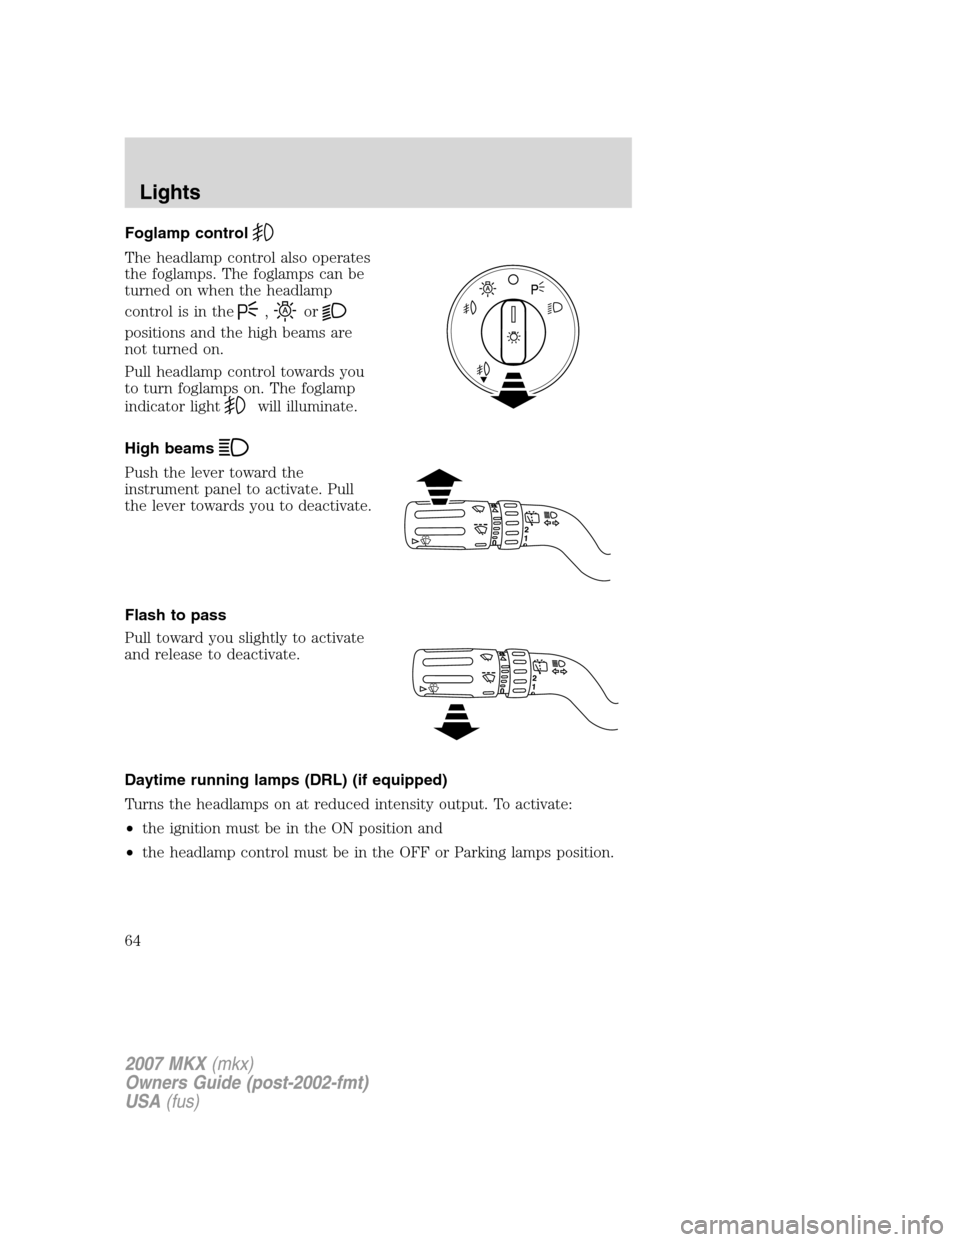 LINCOLN MKX 2007  Owners Manual Foglamp control
The headlamp control also operates
the foglamps. The foglamps can be
turned on when the headlamp
control is in the
,or
positions and the high beams are
not turned on.
Pull headlamp con